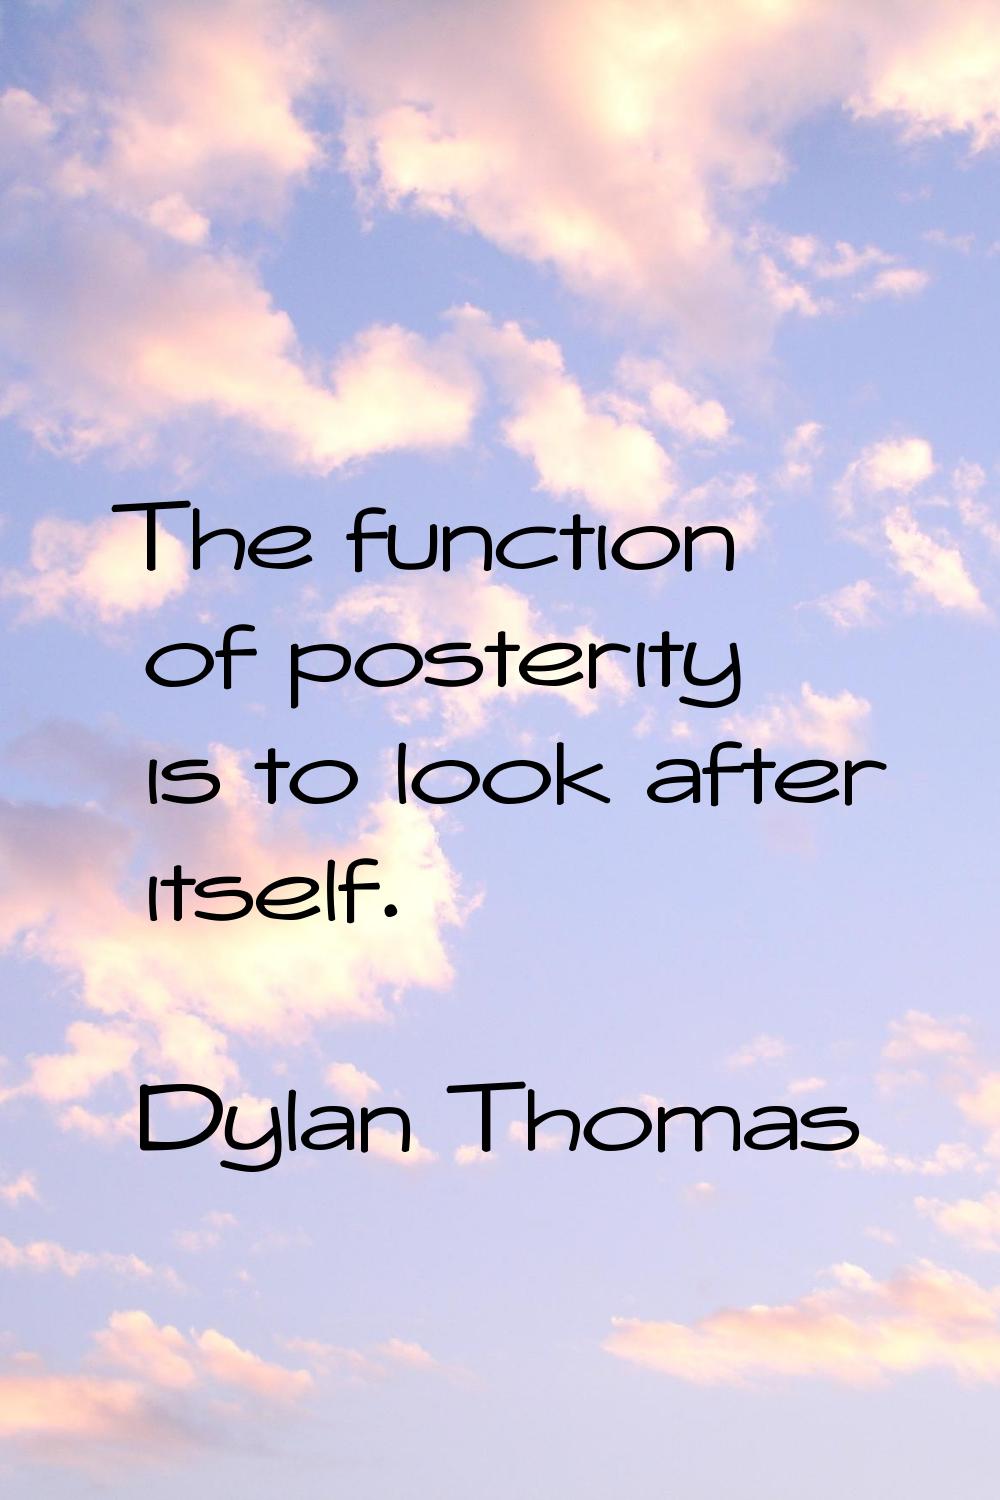 The function of posterity is to look after itself.